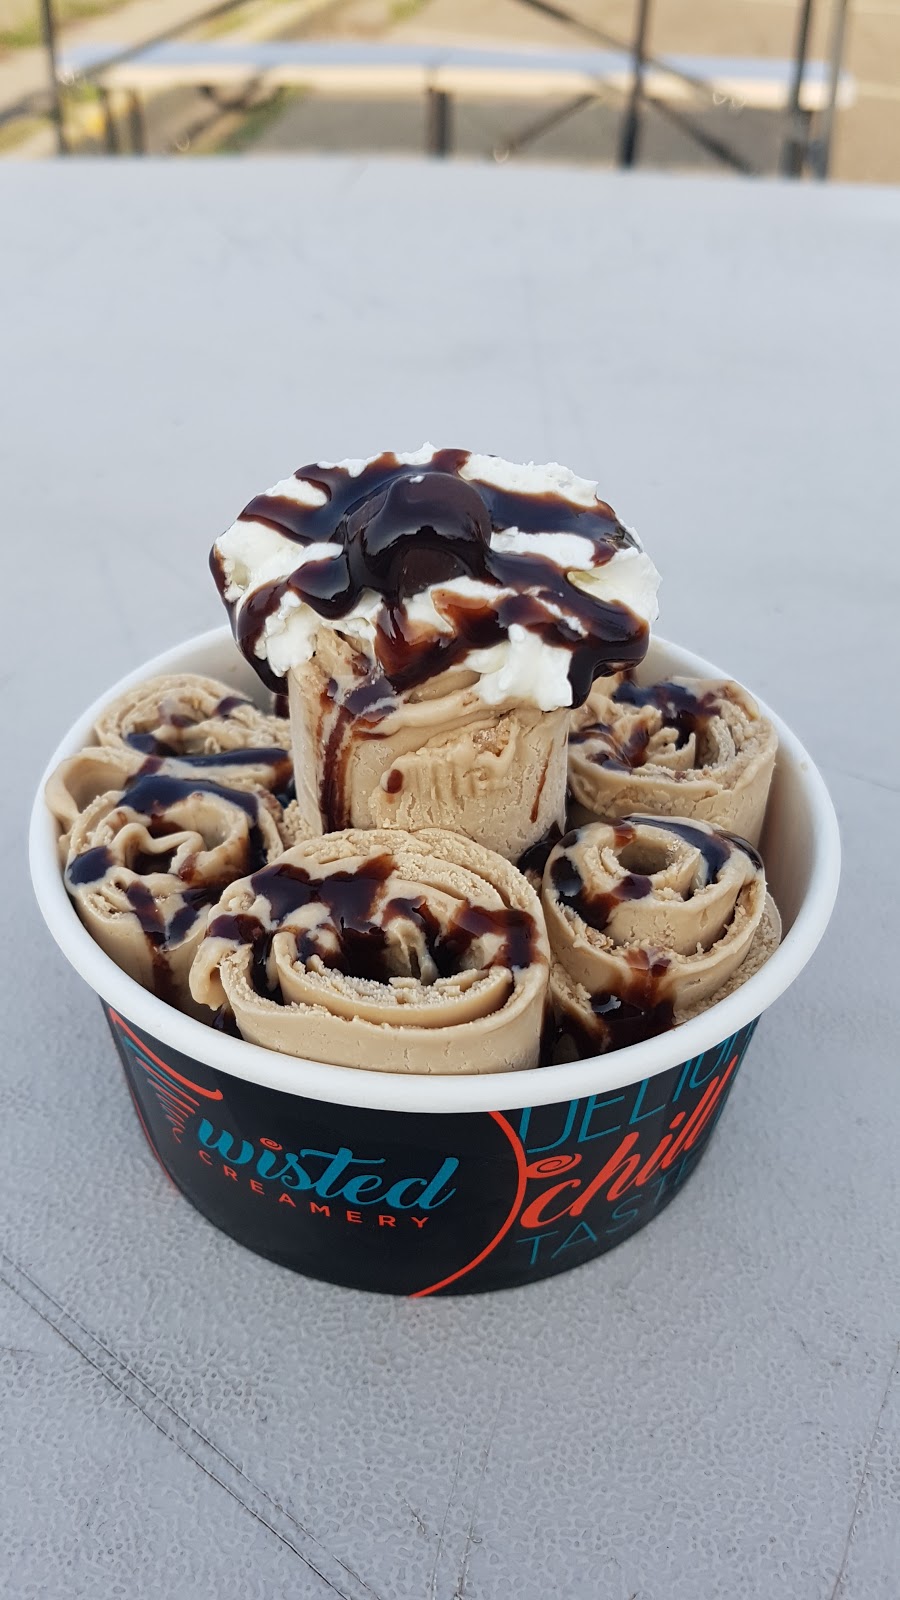 Twisted creamery | store | 11110 108 St NW, Edmonton, AB T5G 2T2, Canada | 6047411789 OR +1 604-741-1789